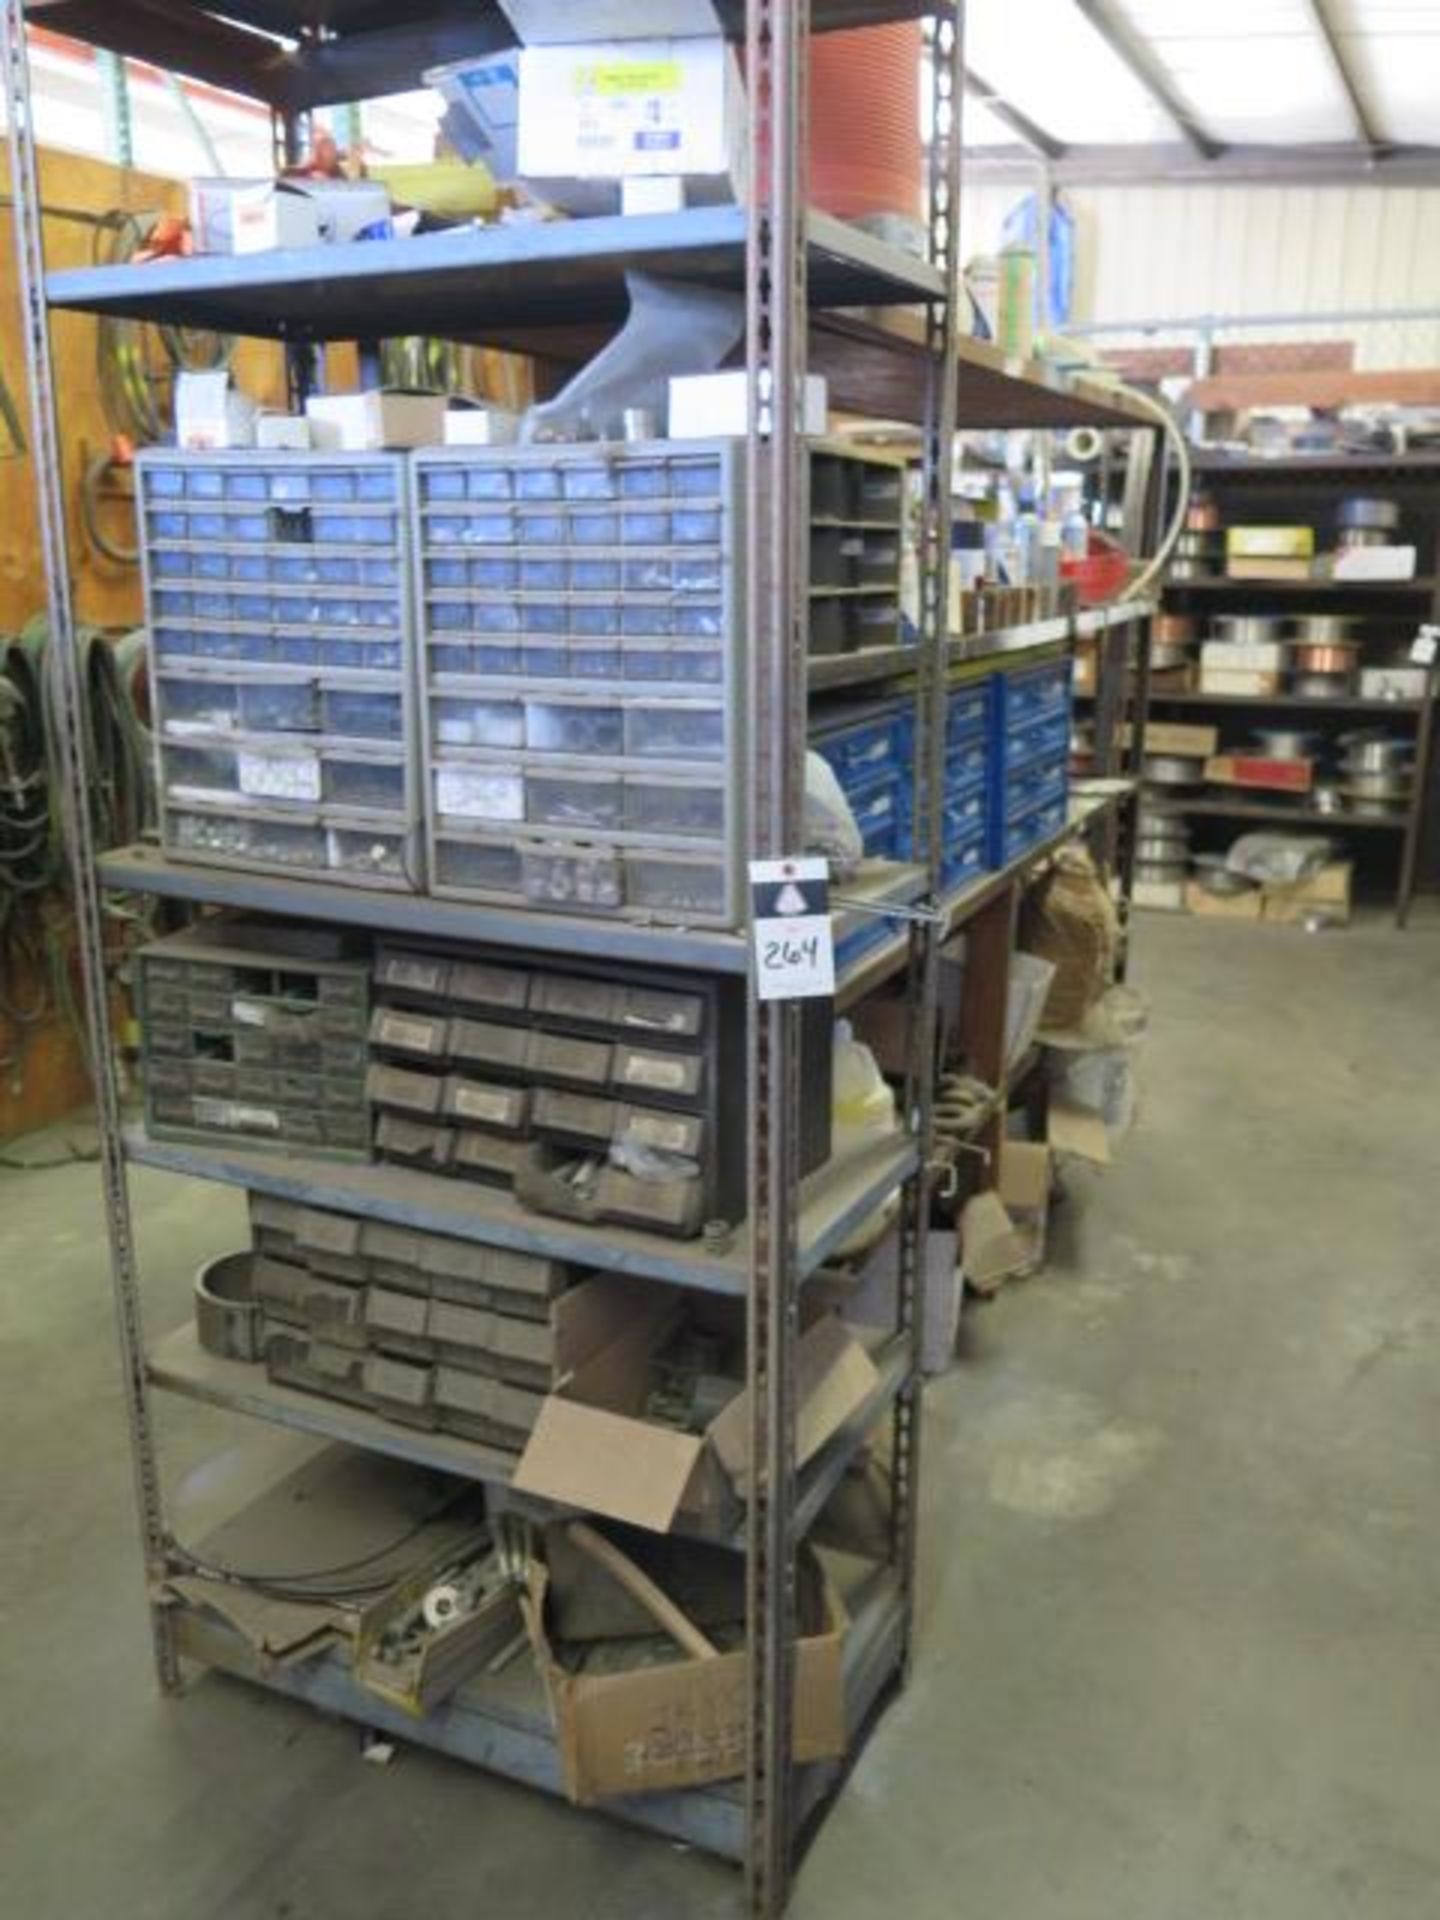 Misc Repair Parts, Hardware and Shop Supplies w/ Shelves (SOLD AS-IS - NO WARRANTY)